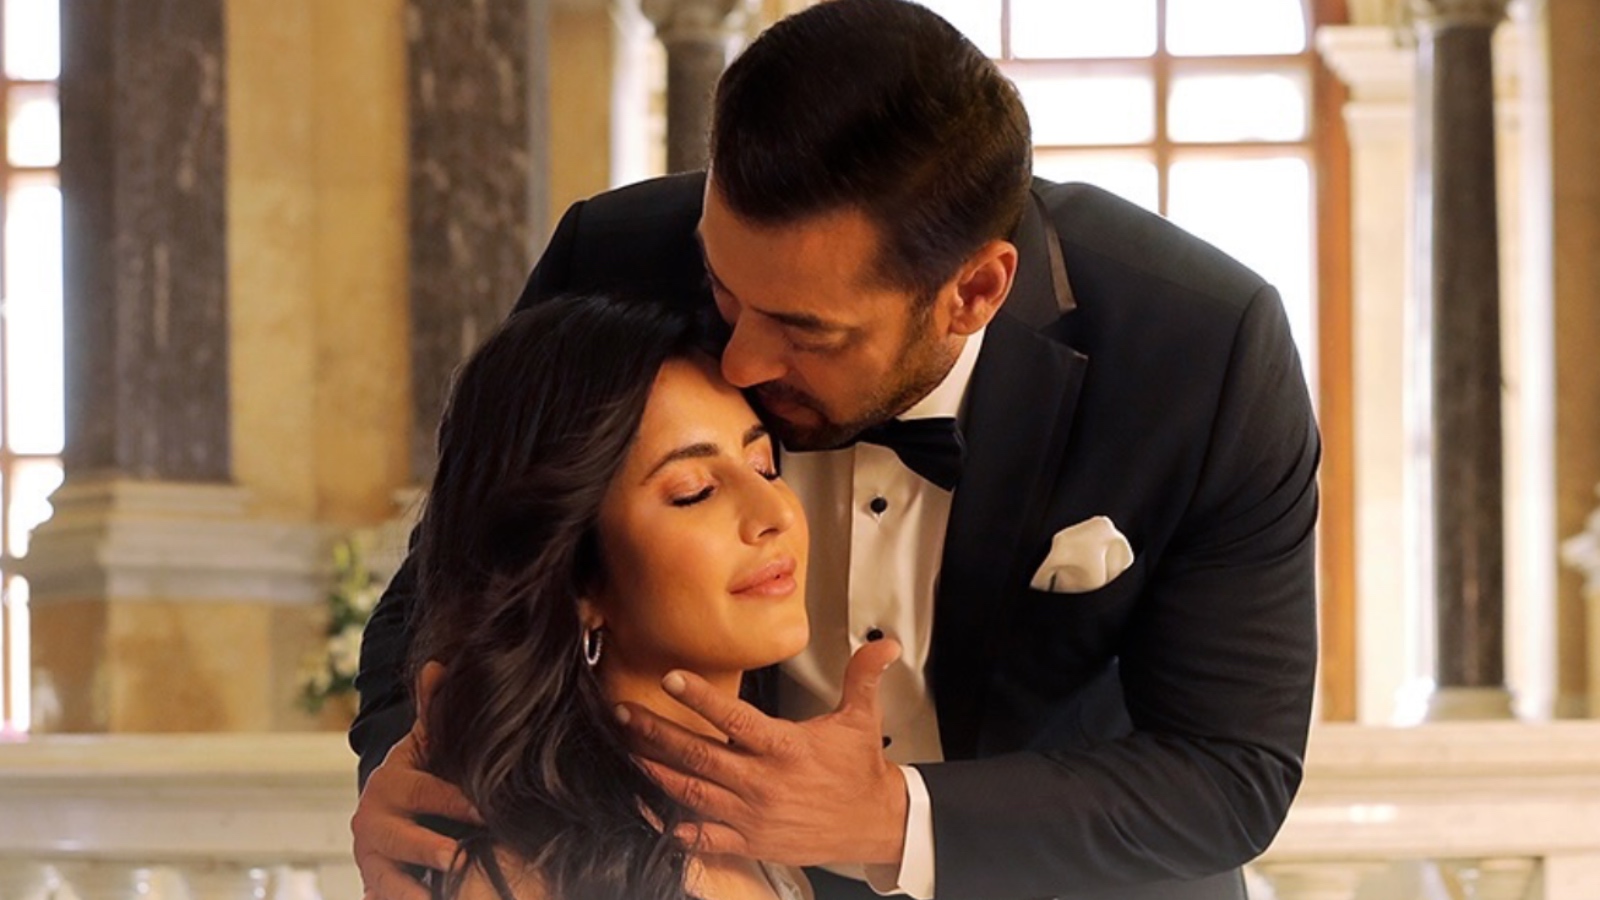 Salman Khan And Katrina Kapoor Porn Video - Salman Khan up for Katrina Kaif headlining Zoya spin off film, but says  there's a catch: 'Tiger will save the day in climax' | Bollywood News - The  Indian Express